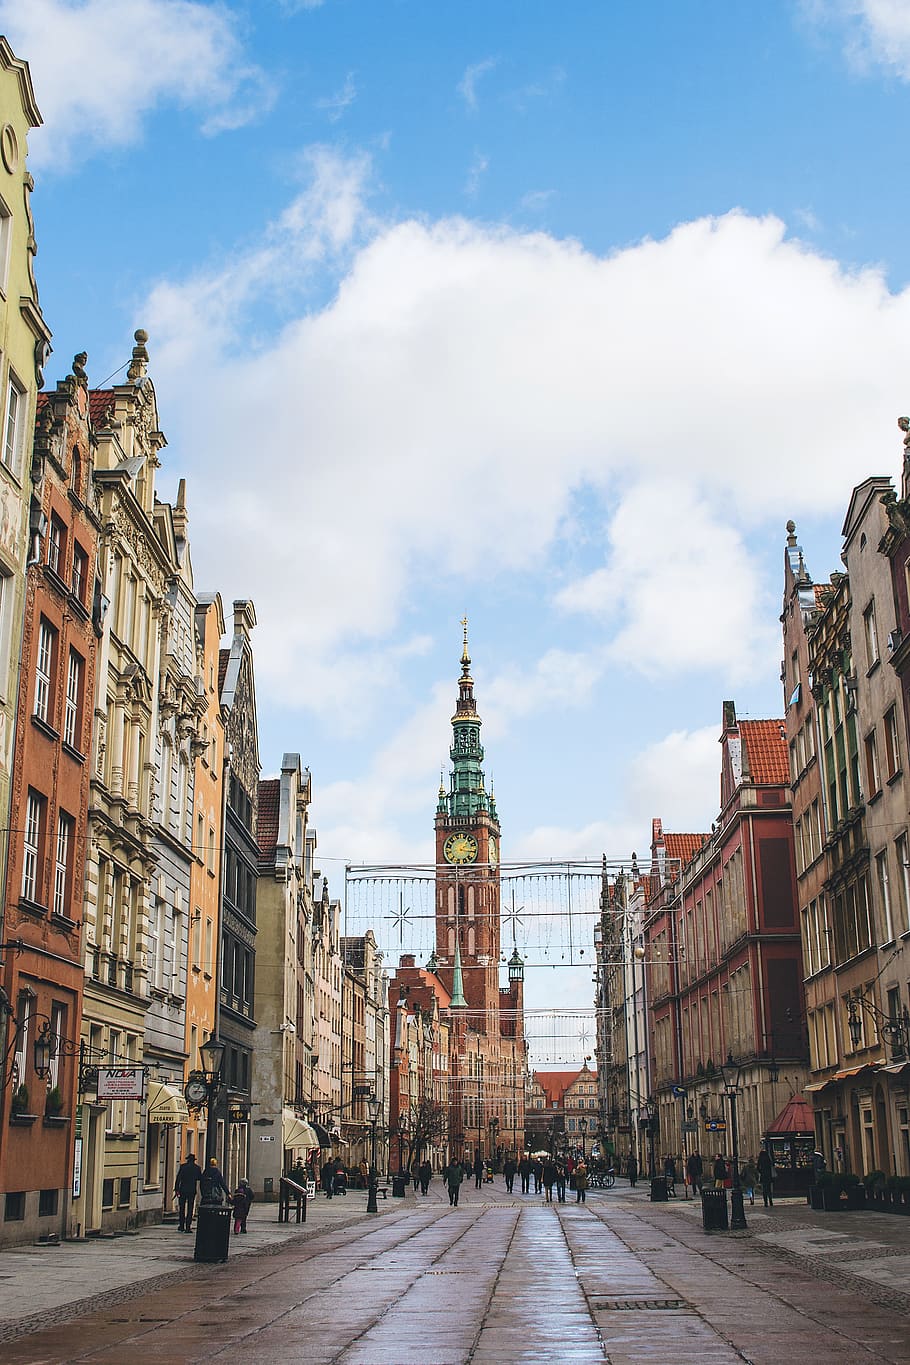 city, architecture, blue, building, clouds, gdansk, old town, poland, sky, street